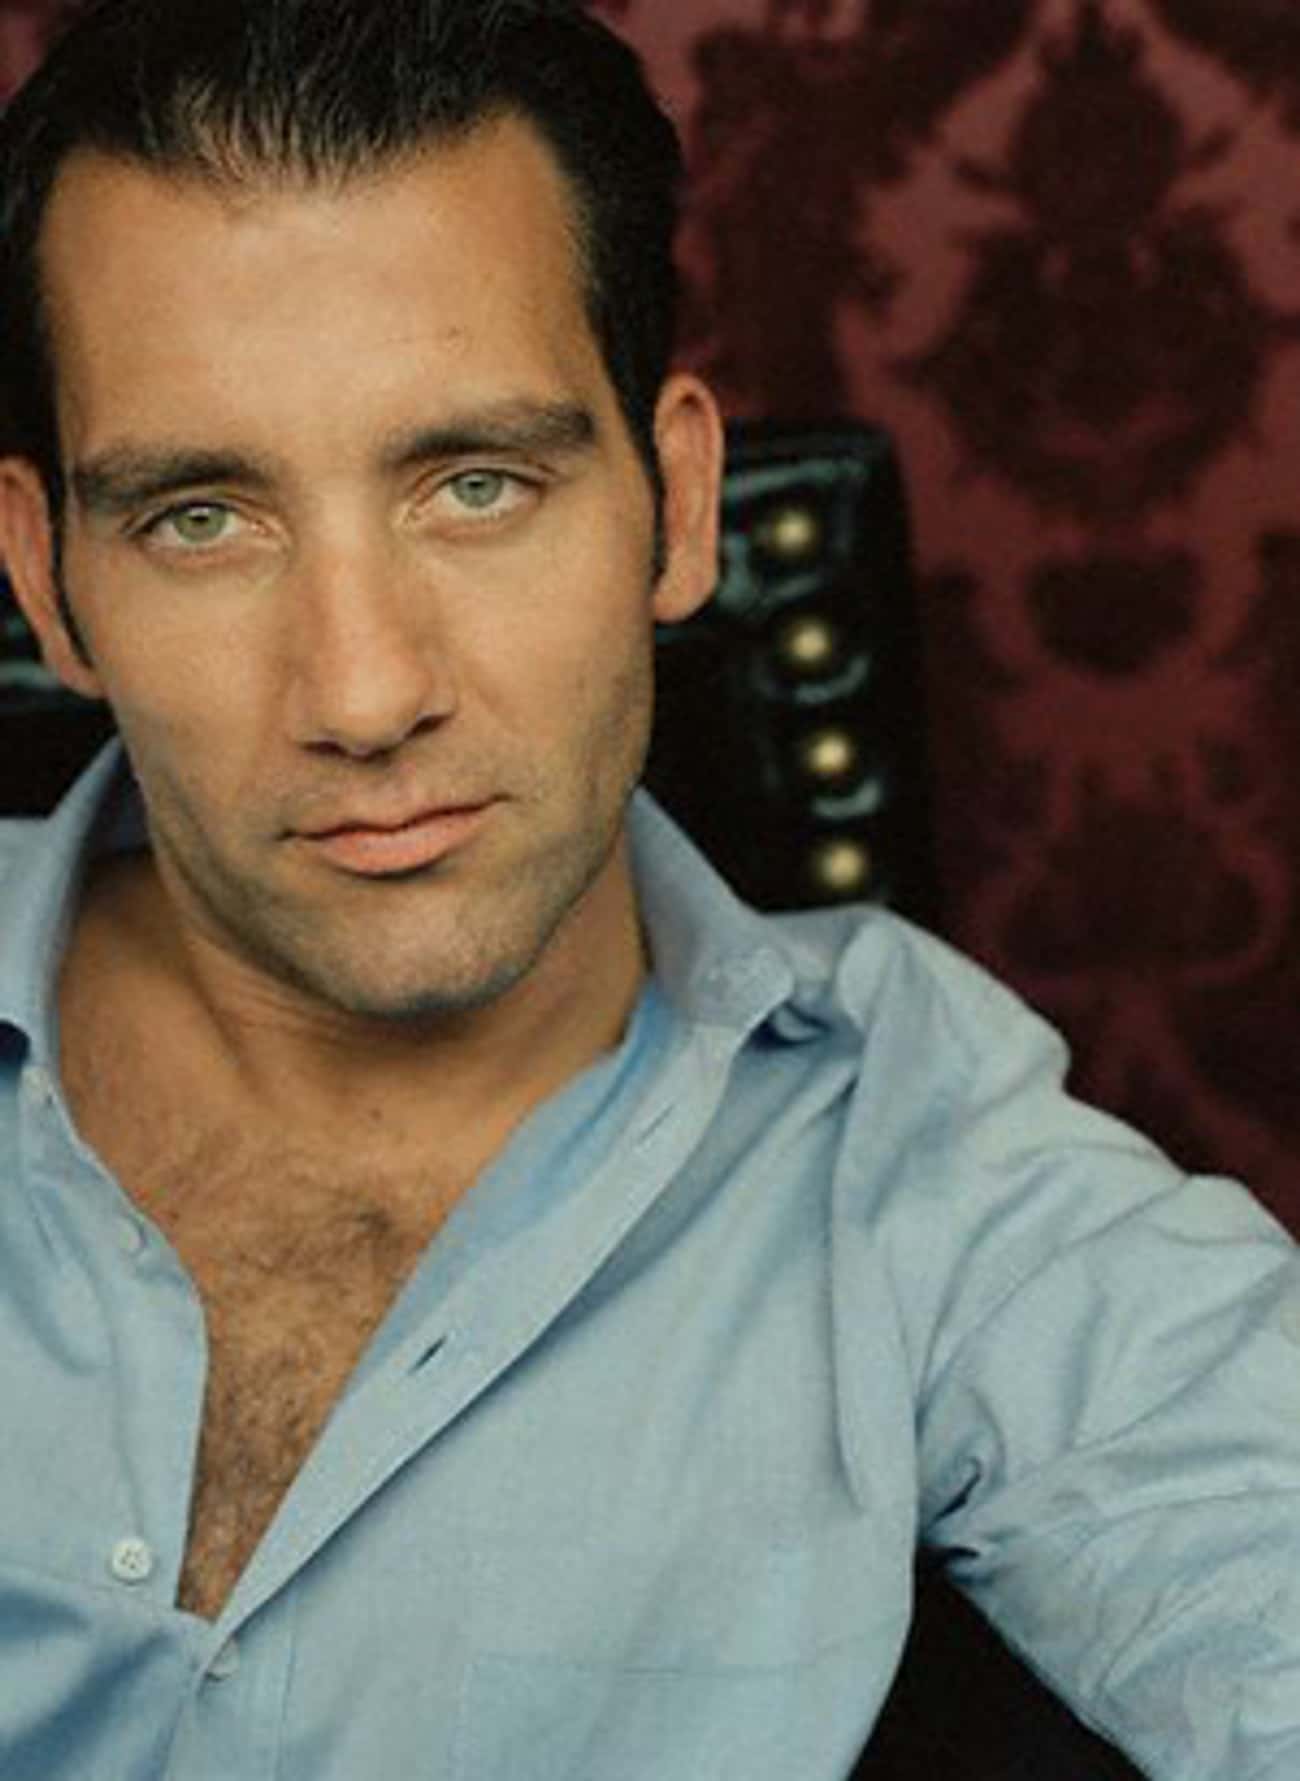 Clive Owen in Blue-Gray Long Sleeves